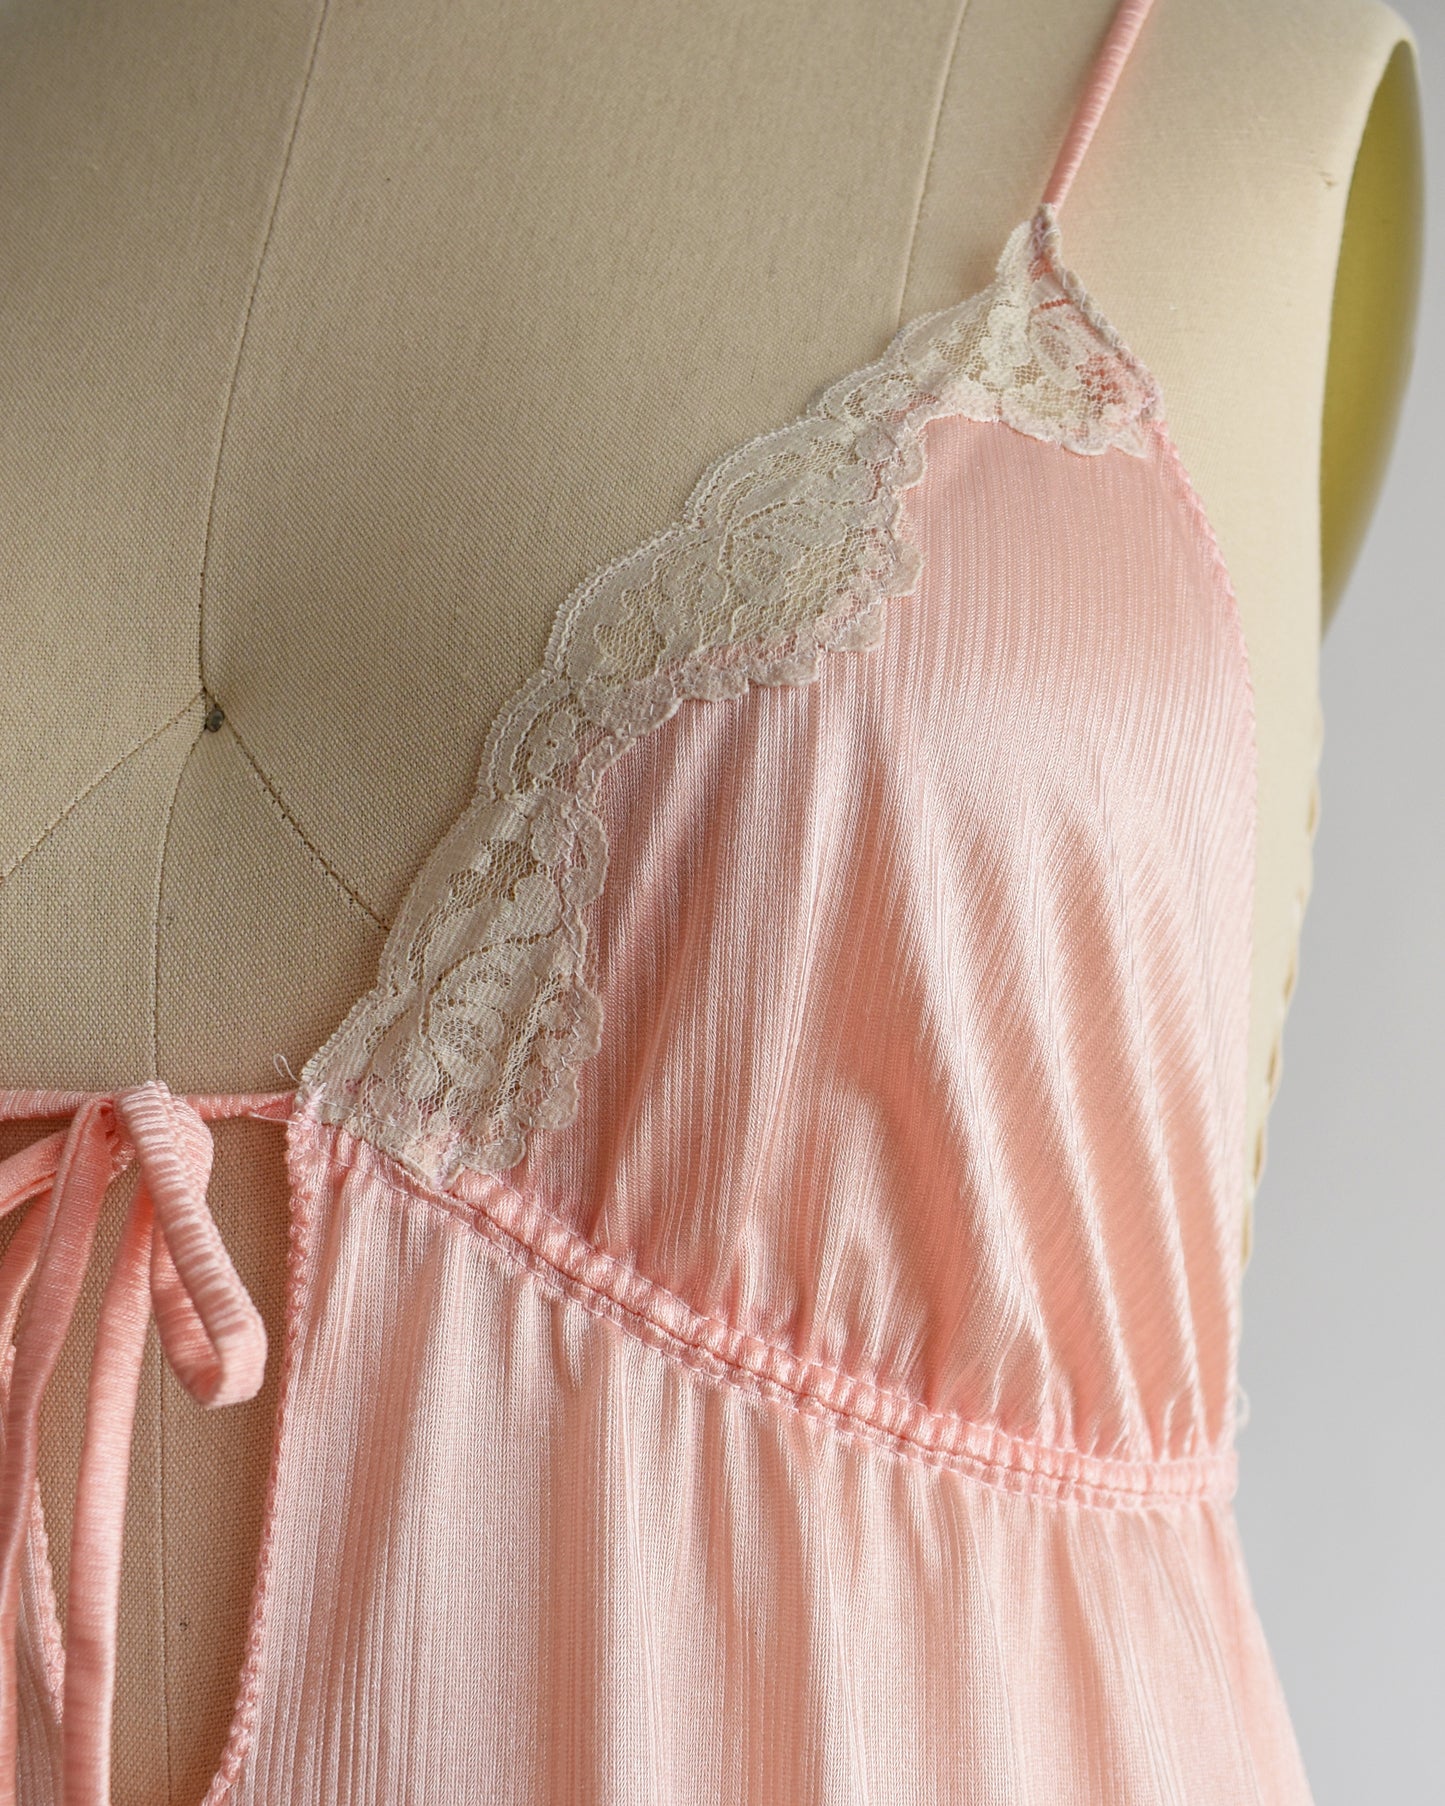 Close up of the bodice which shows the lace trim and texture of the fabric